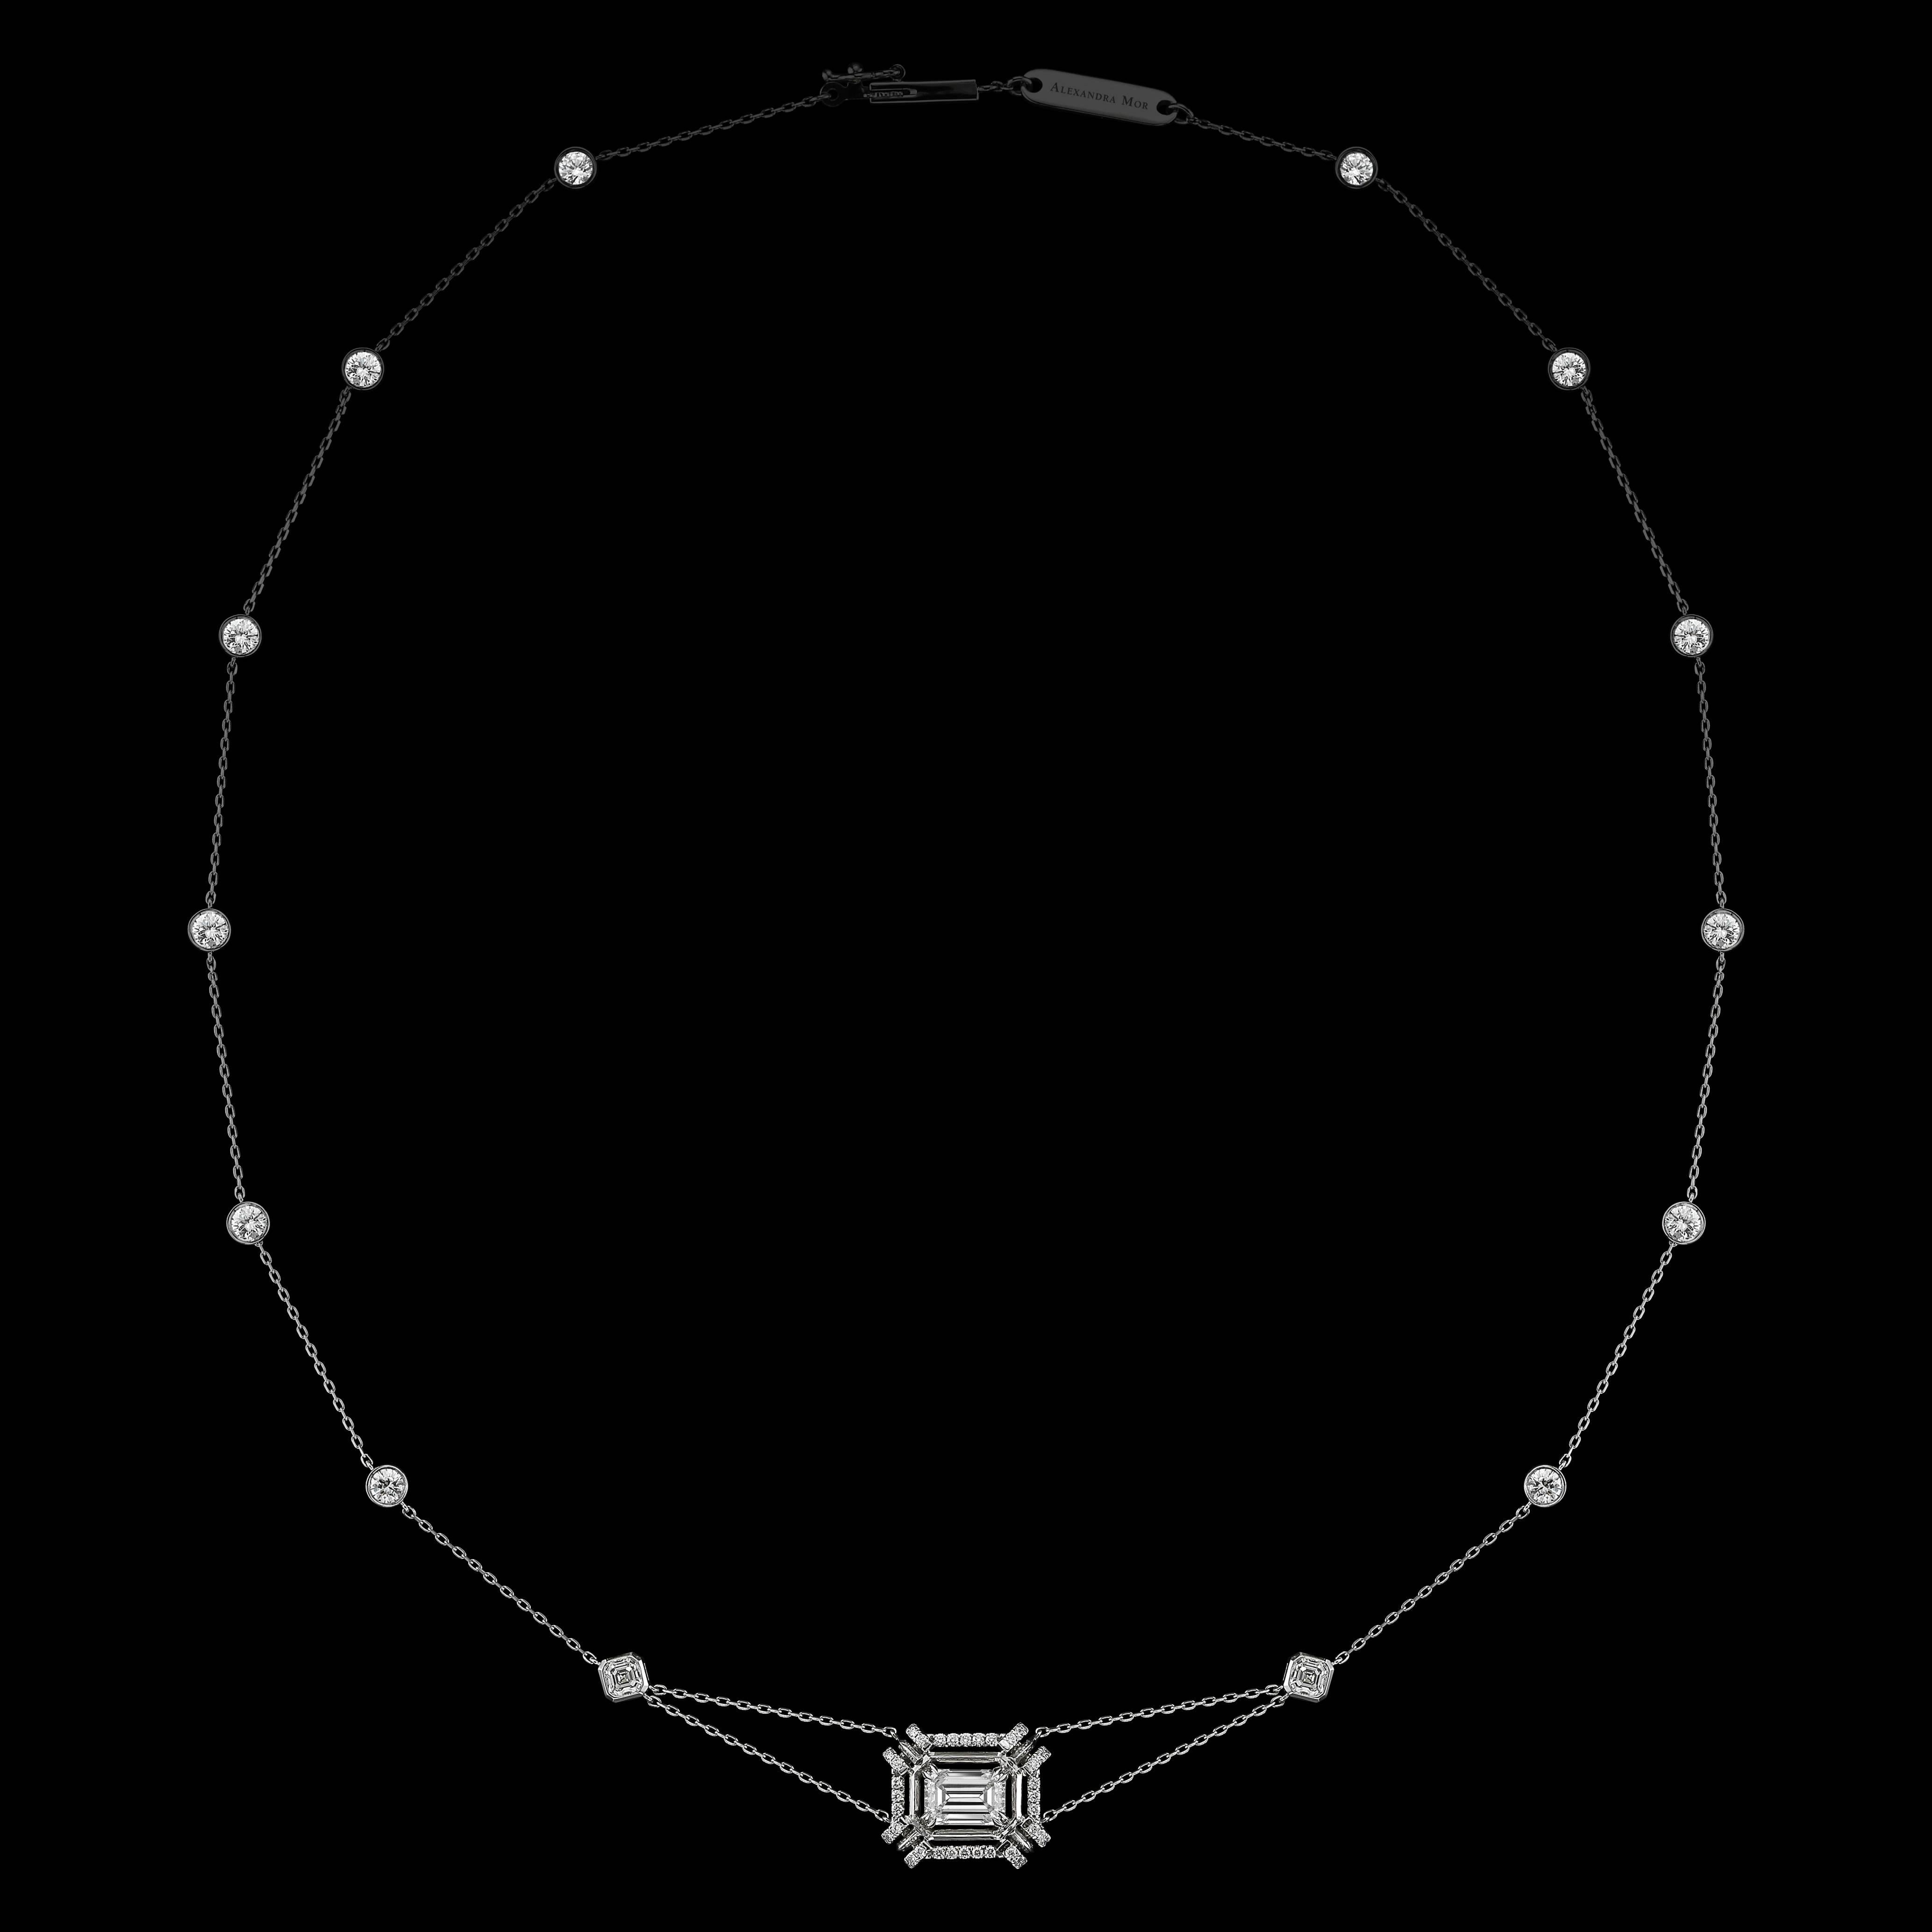 This Alexandra Mor Diamond platform necklace features a 1.30 carat Emerald-cut Diamond F VS2 GIA , bordered with Alexandra Mor's signature 1mm Diamond melee and 1mm knife-edged wire. Necklace is set with twelve evenly spaced Round Brilliant-cut